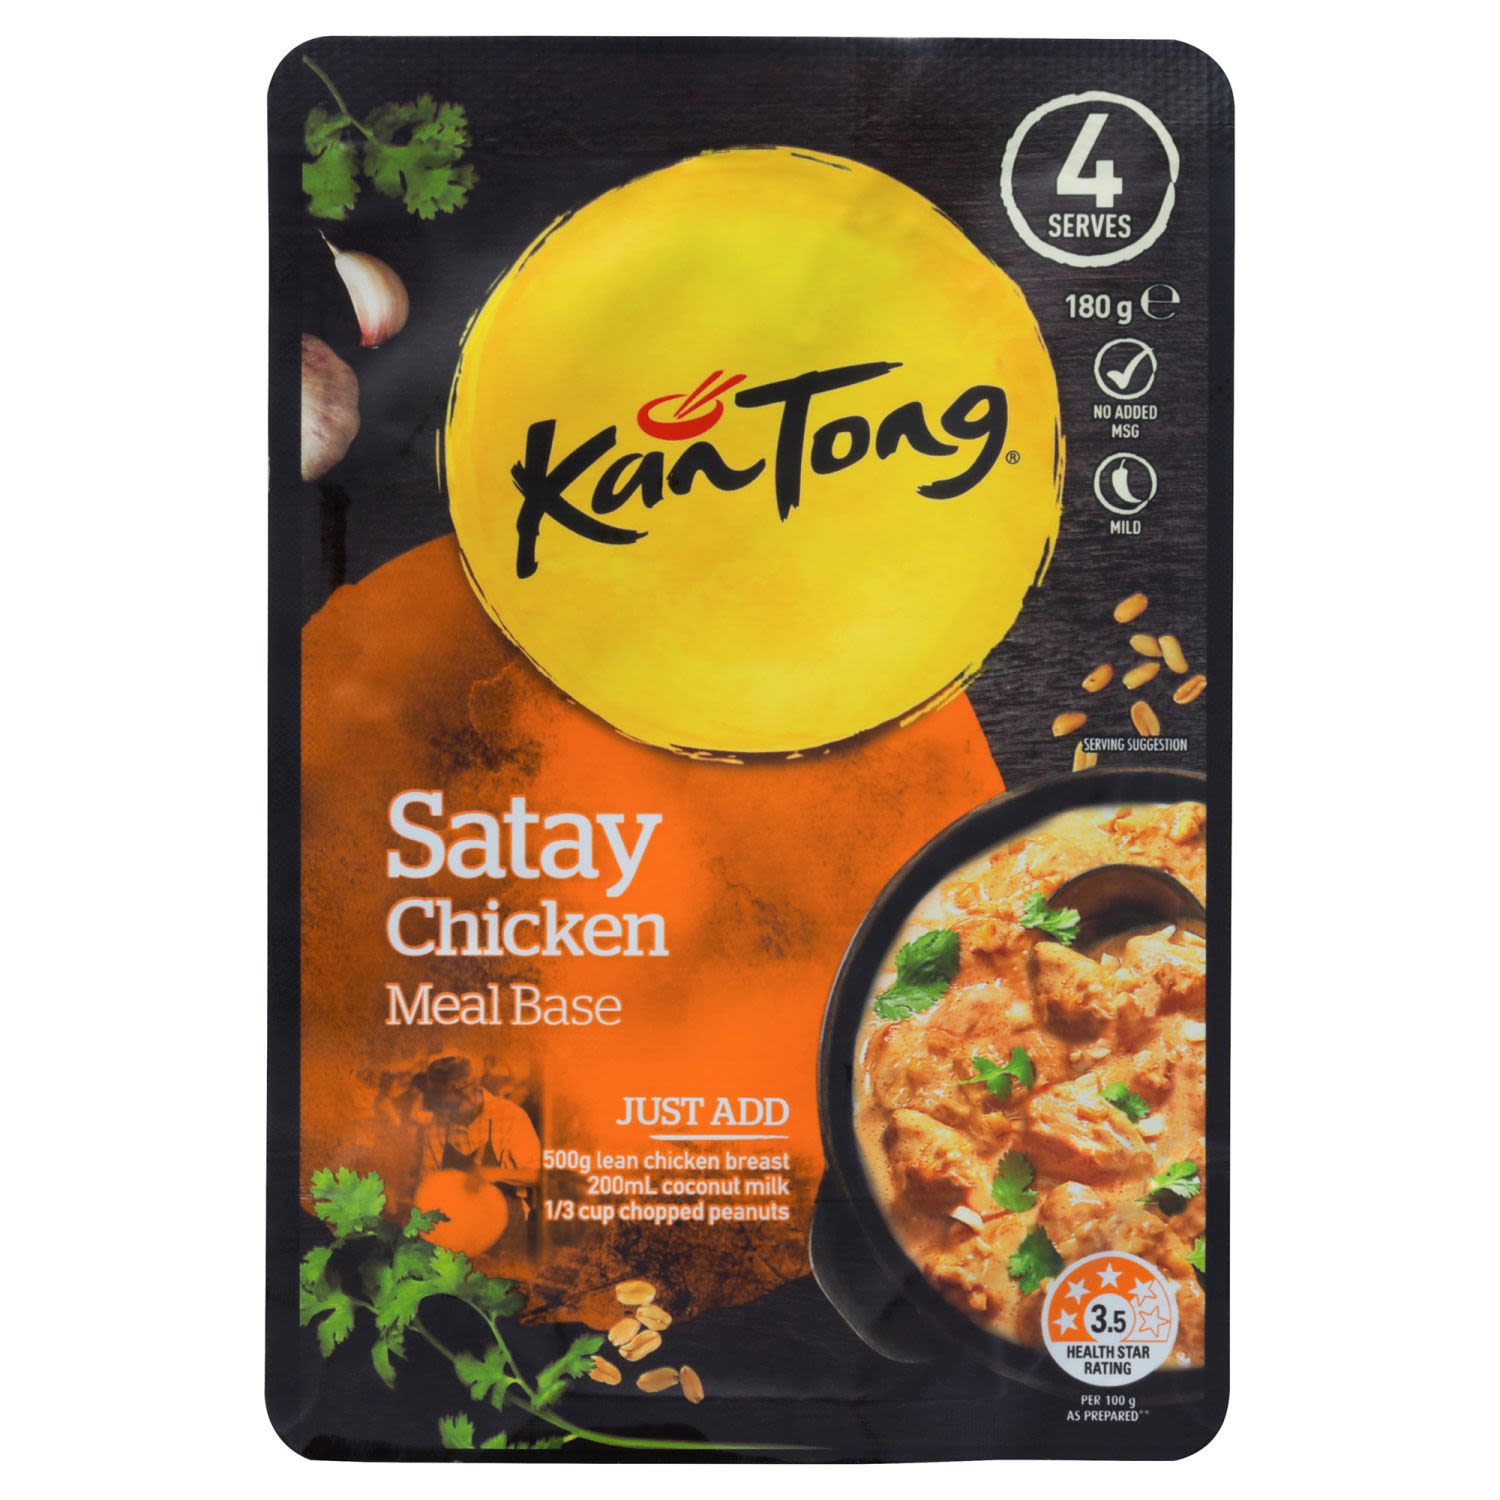 Kan Tong Satay Chicken Meal Base Pouch, 180 Gram